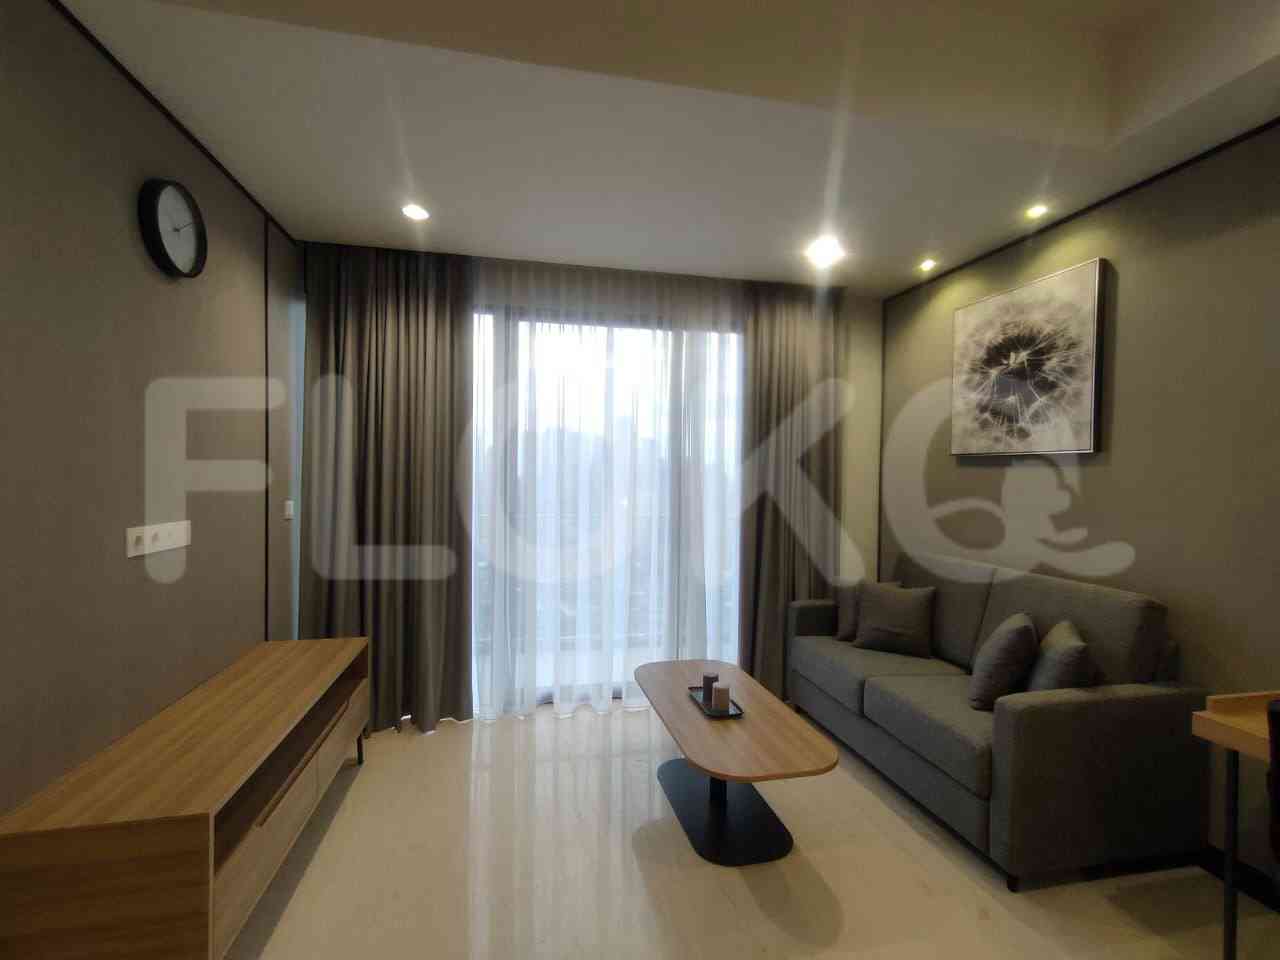 2 Bedroom on 22nd Floor for Rent in Sudirman Hill Residences - ftad16 1